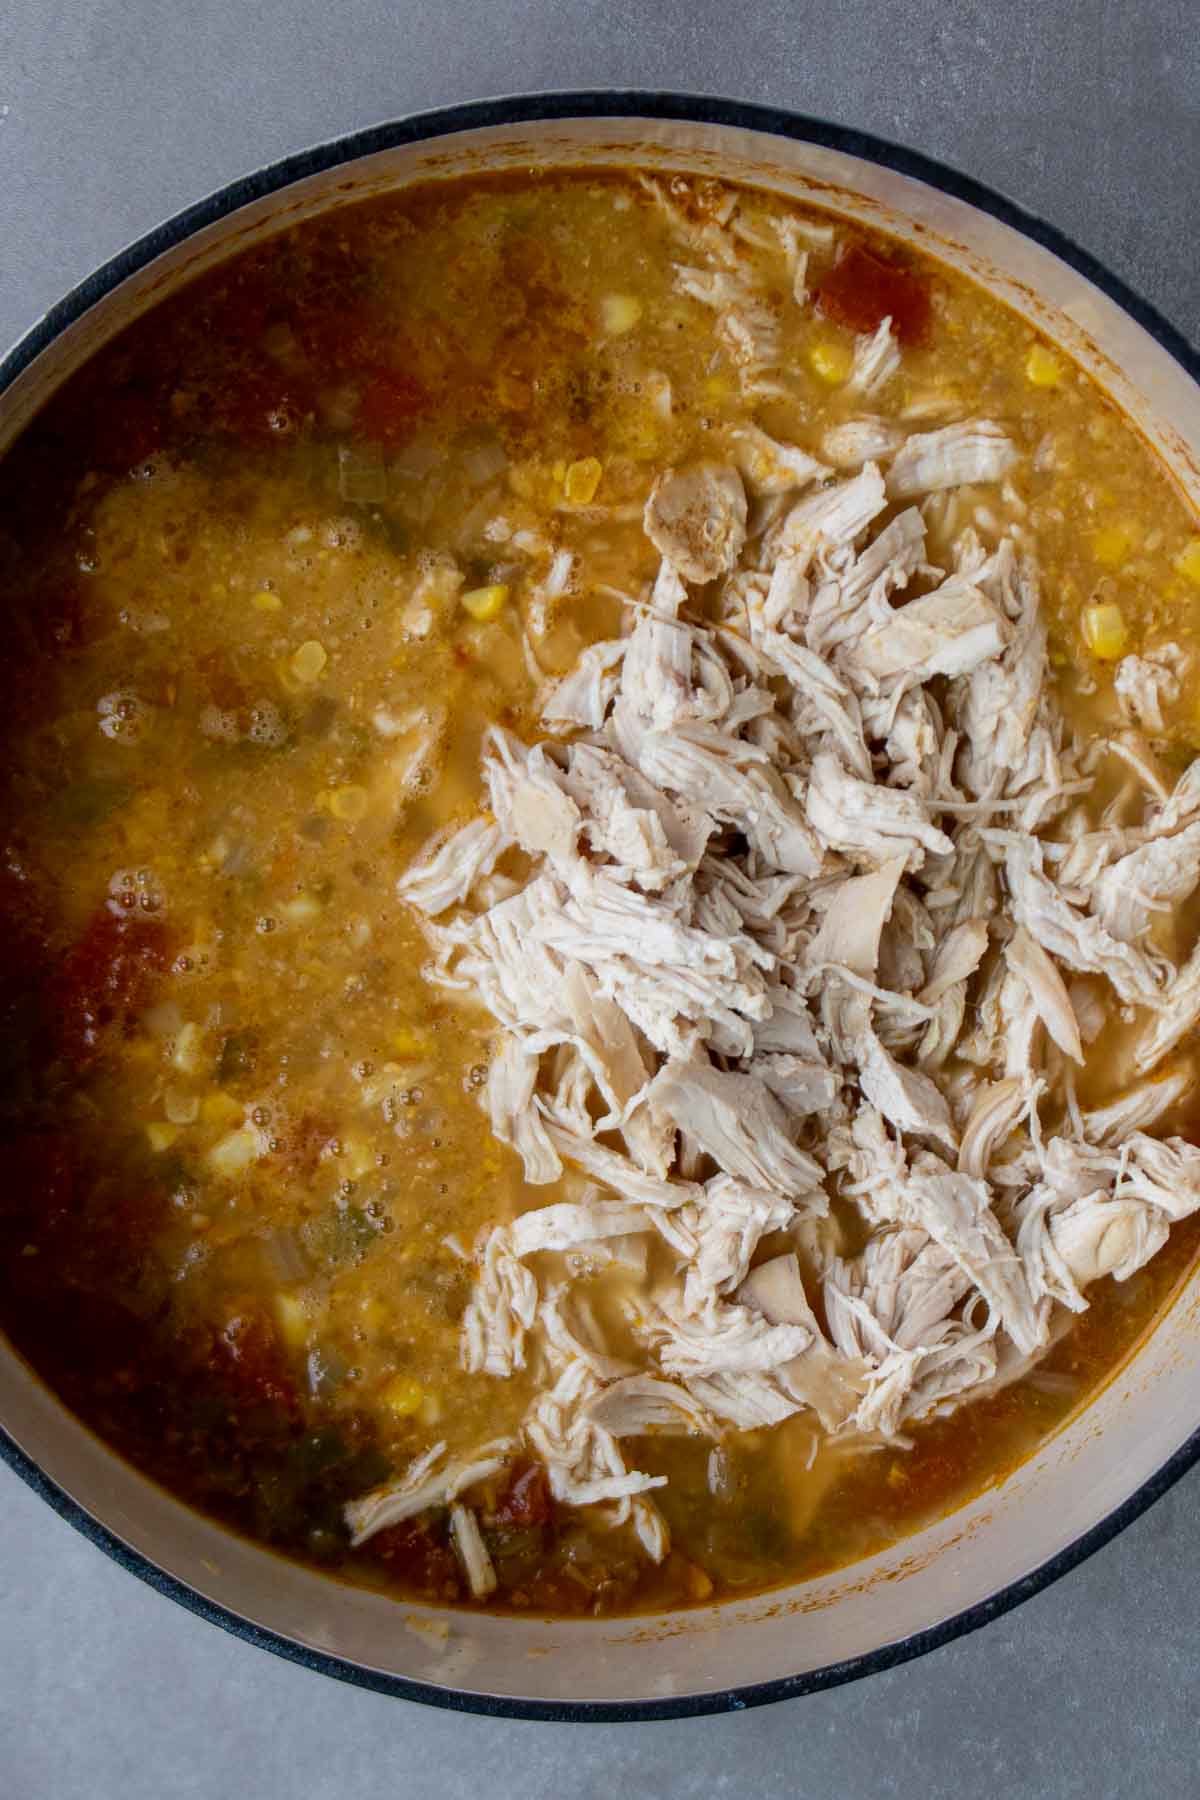 Corn soup with shredded chicken in a pot.